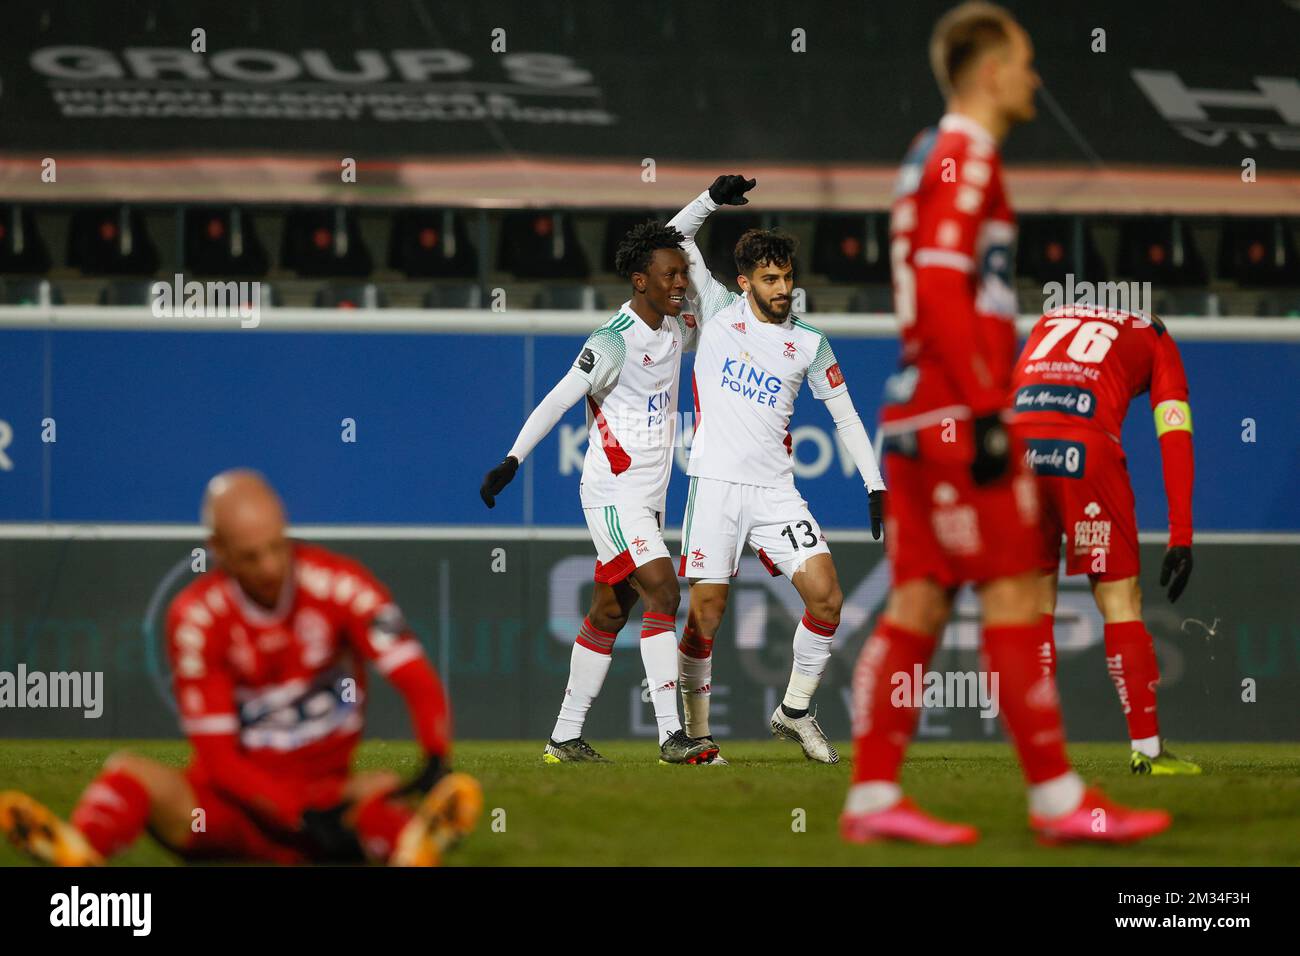 OHL's Kamal Sowah celebrates after scoring during a soccer match between OH Leuven and KV Kortrijk, Friday 12 February 2021 in Oud-Heverlee, on day 26 of the 'Jupiler Pro League' first division of the Belgian championship. BELGA PHOTO BRUNO FAHY Stock Photo